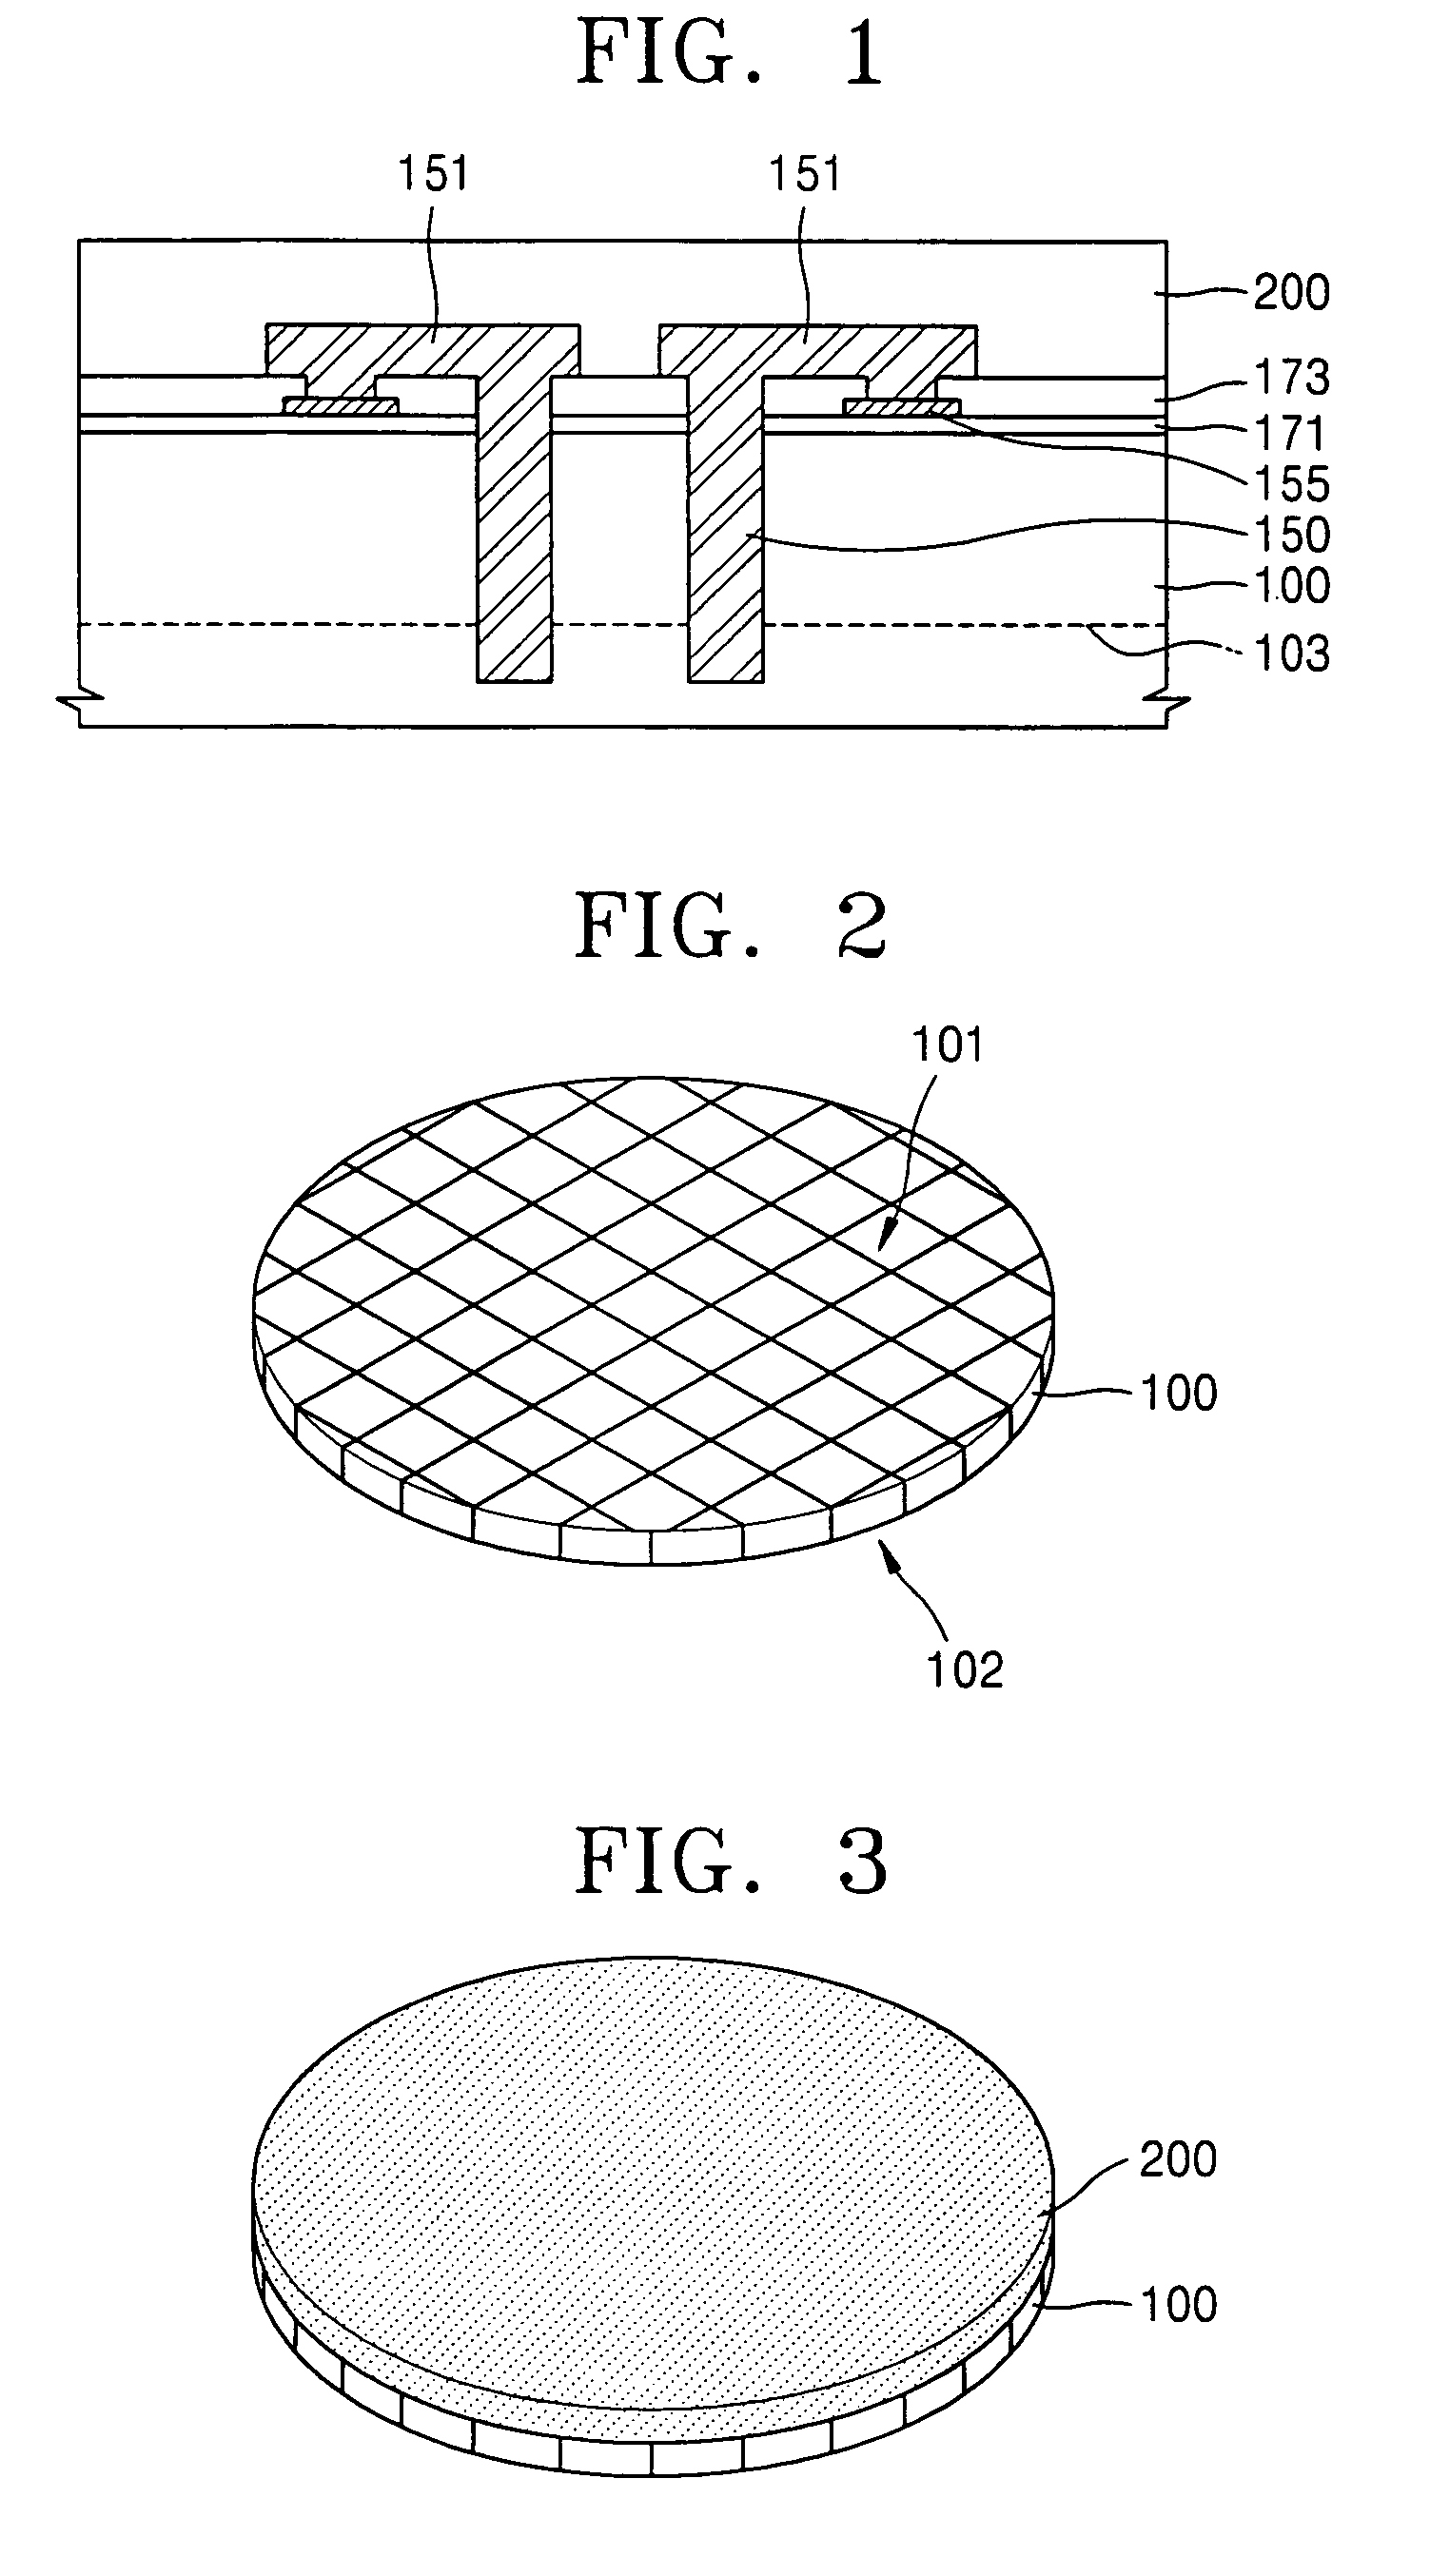 Method of forming a thin wafer stack for a wafer level package